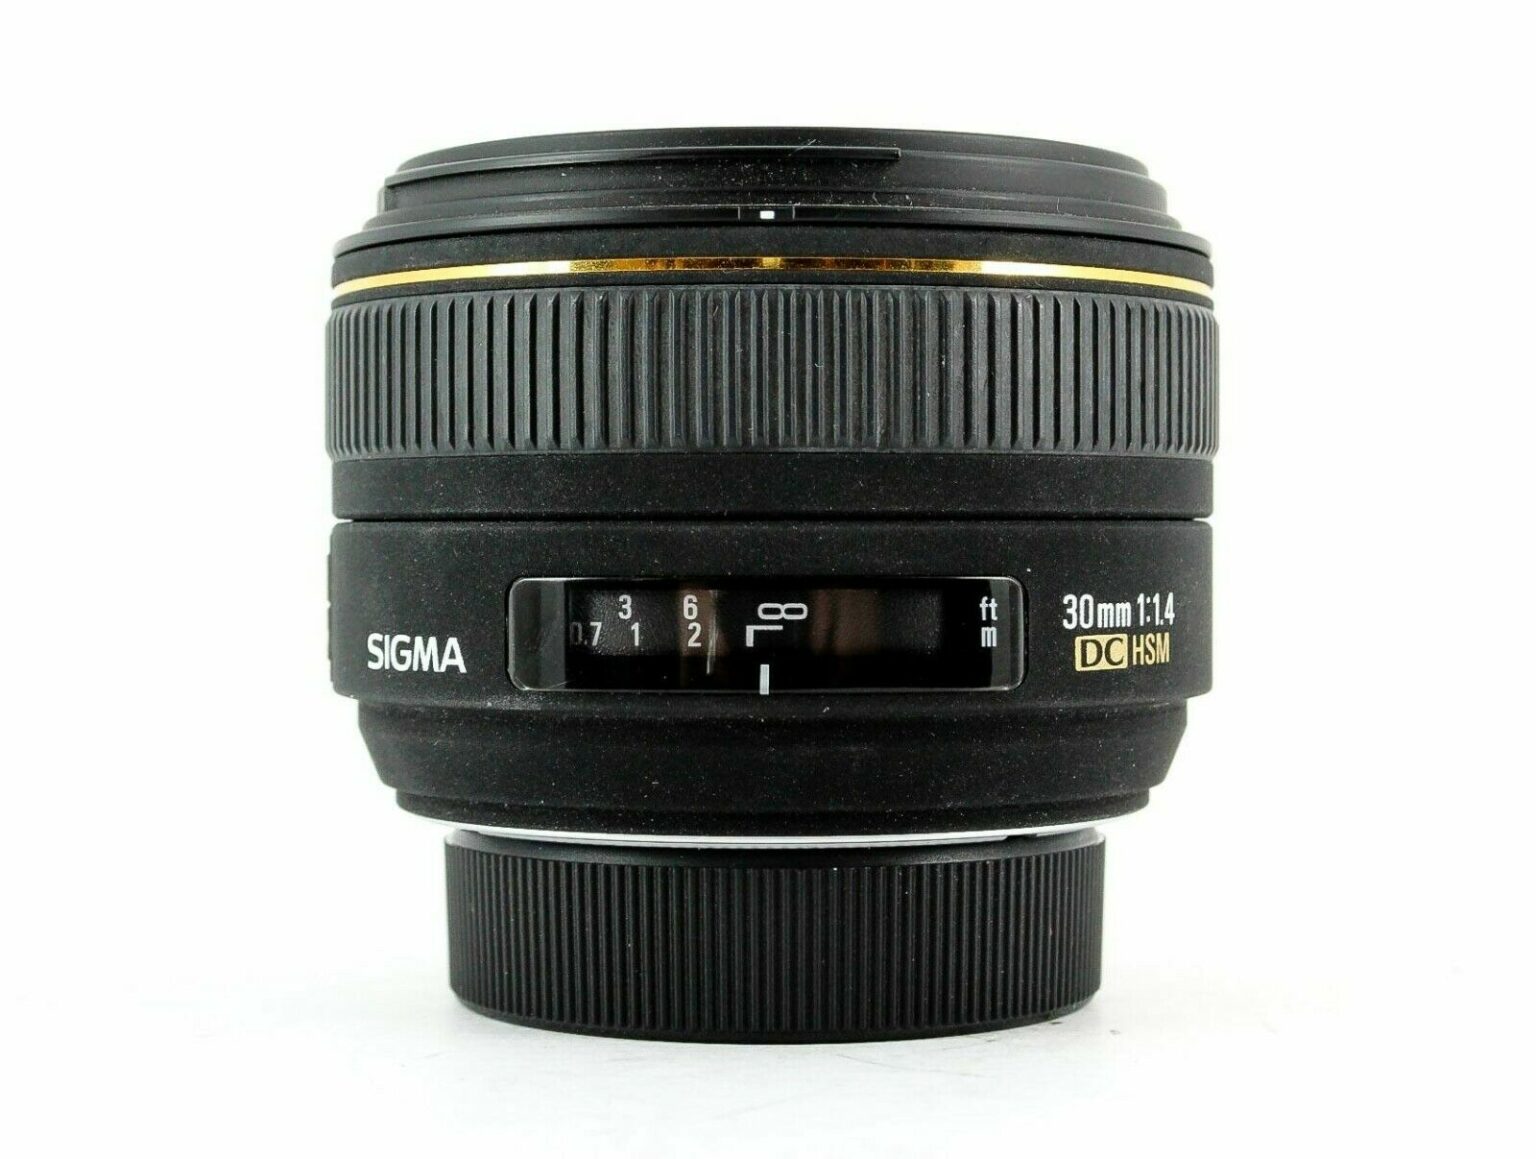 Sigma 30mm f1.4 EX DC HSM for Canon Lens - Lenses and Cameras